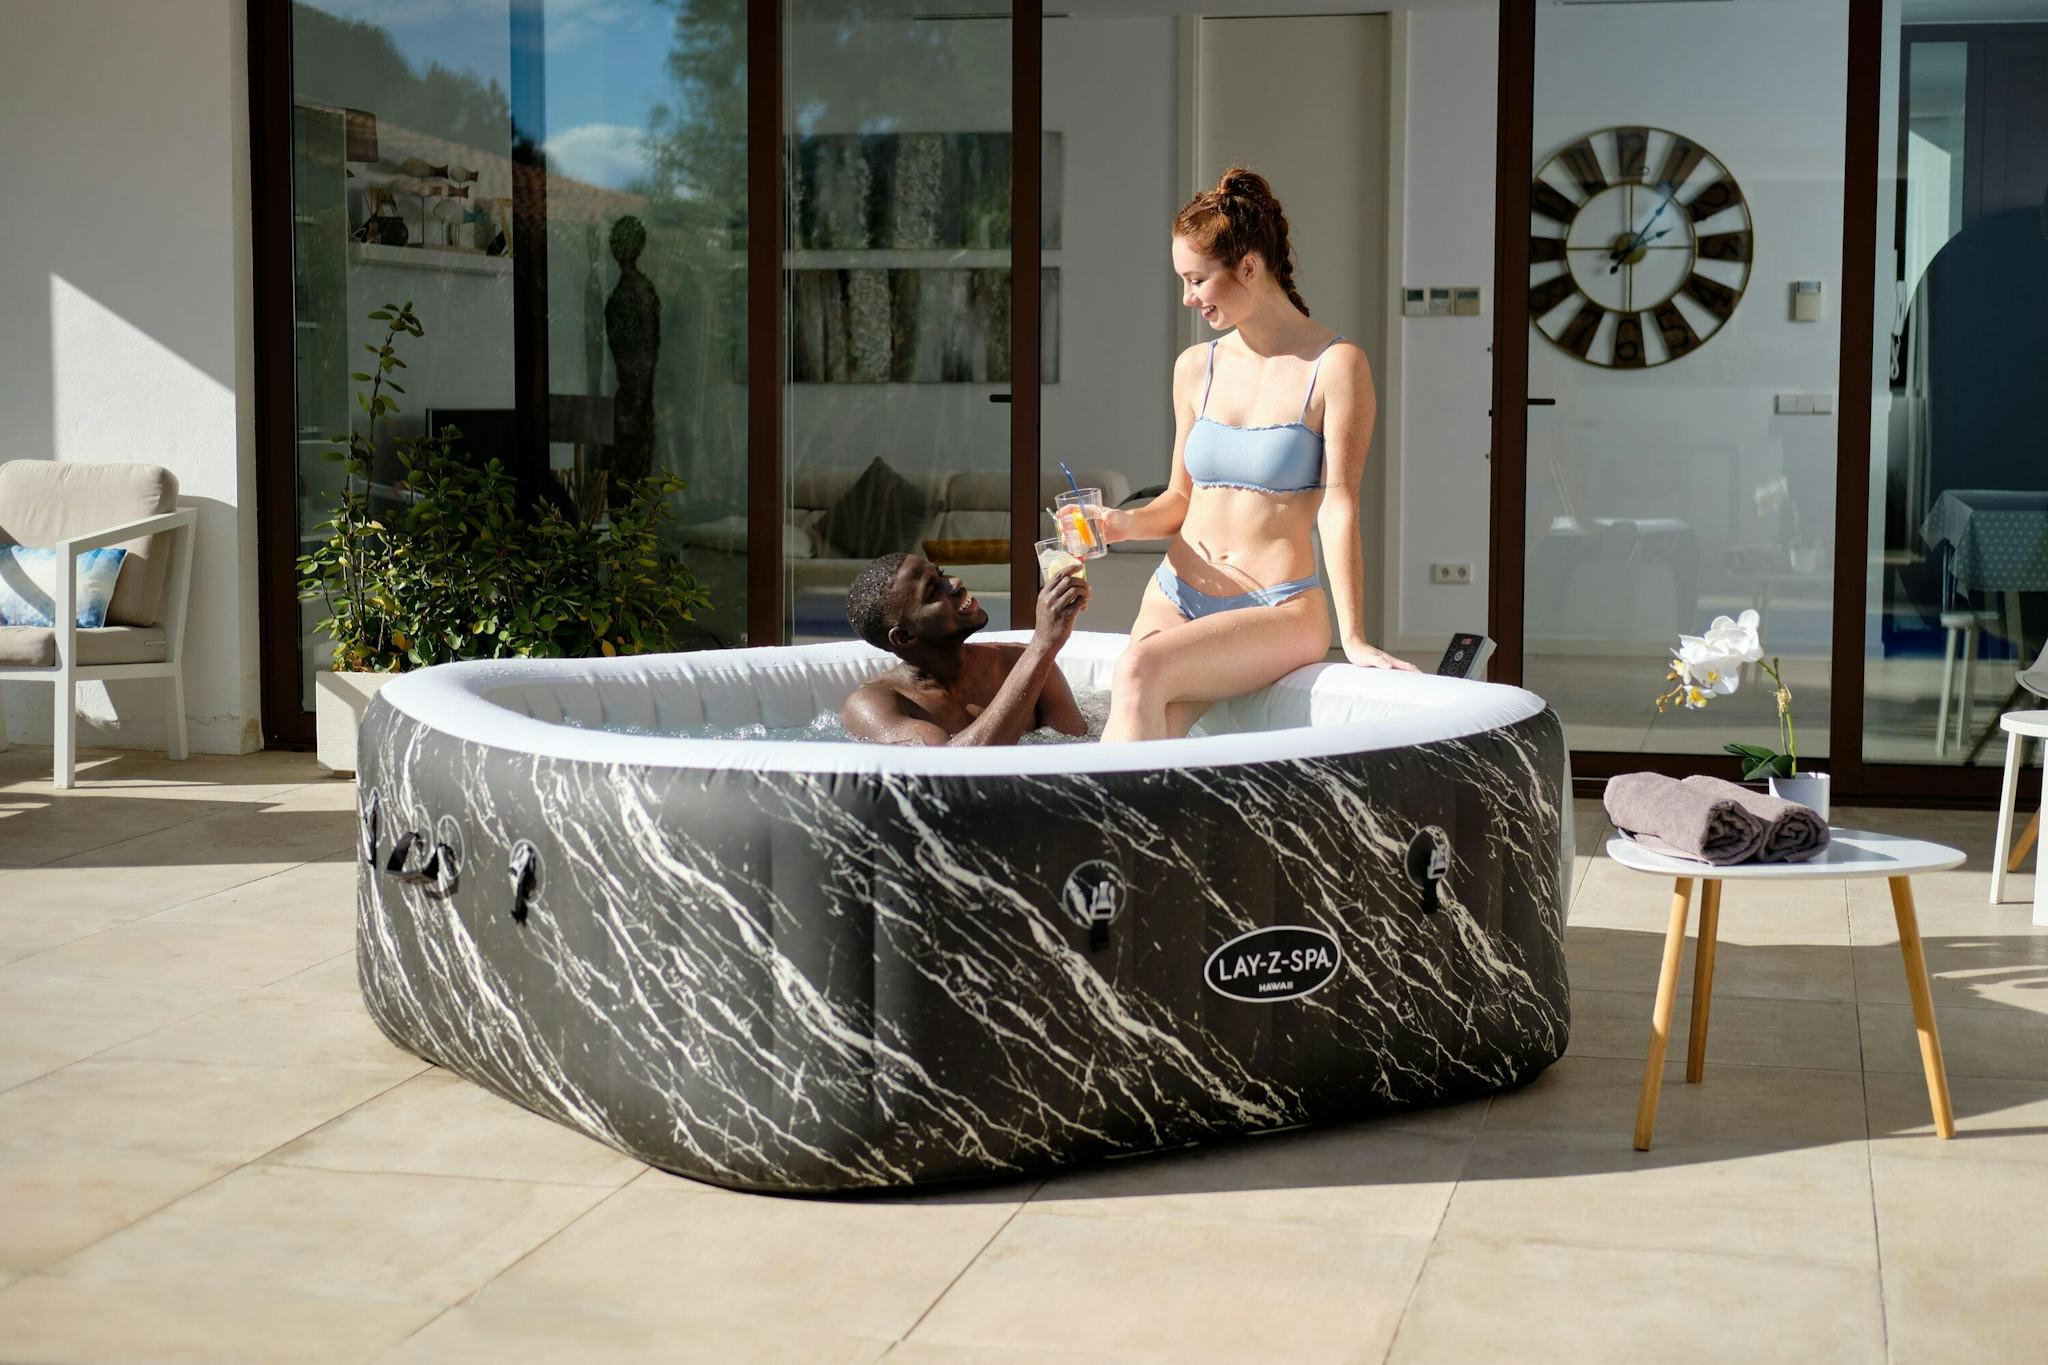 Spas Gonflables Spa gonflable carré Lay-Z-Spa Hawaii Smart Luxe Airjet™ 4 - 6 personnes Bestway 10